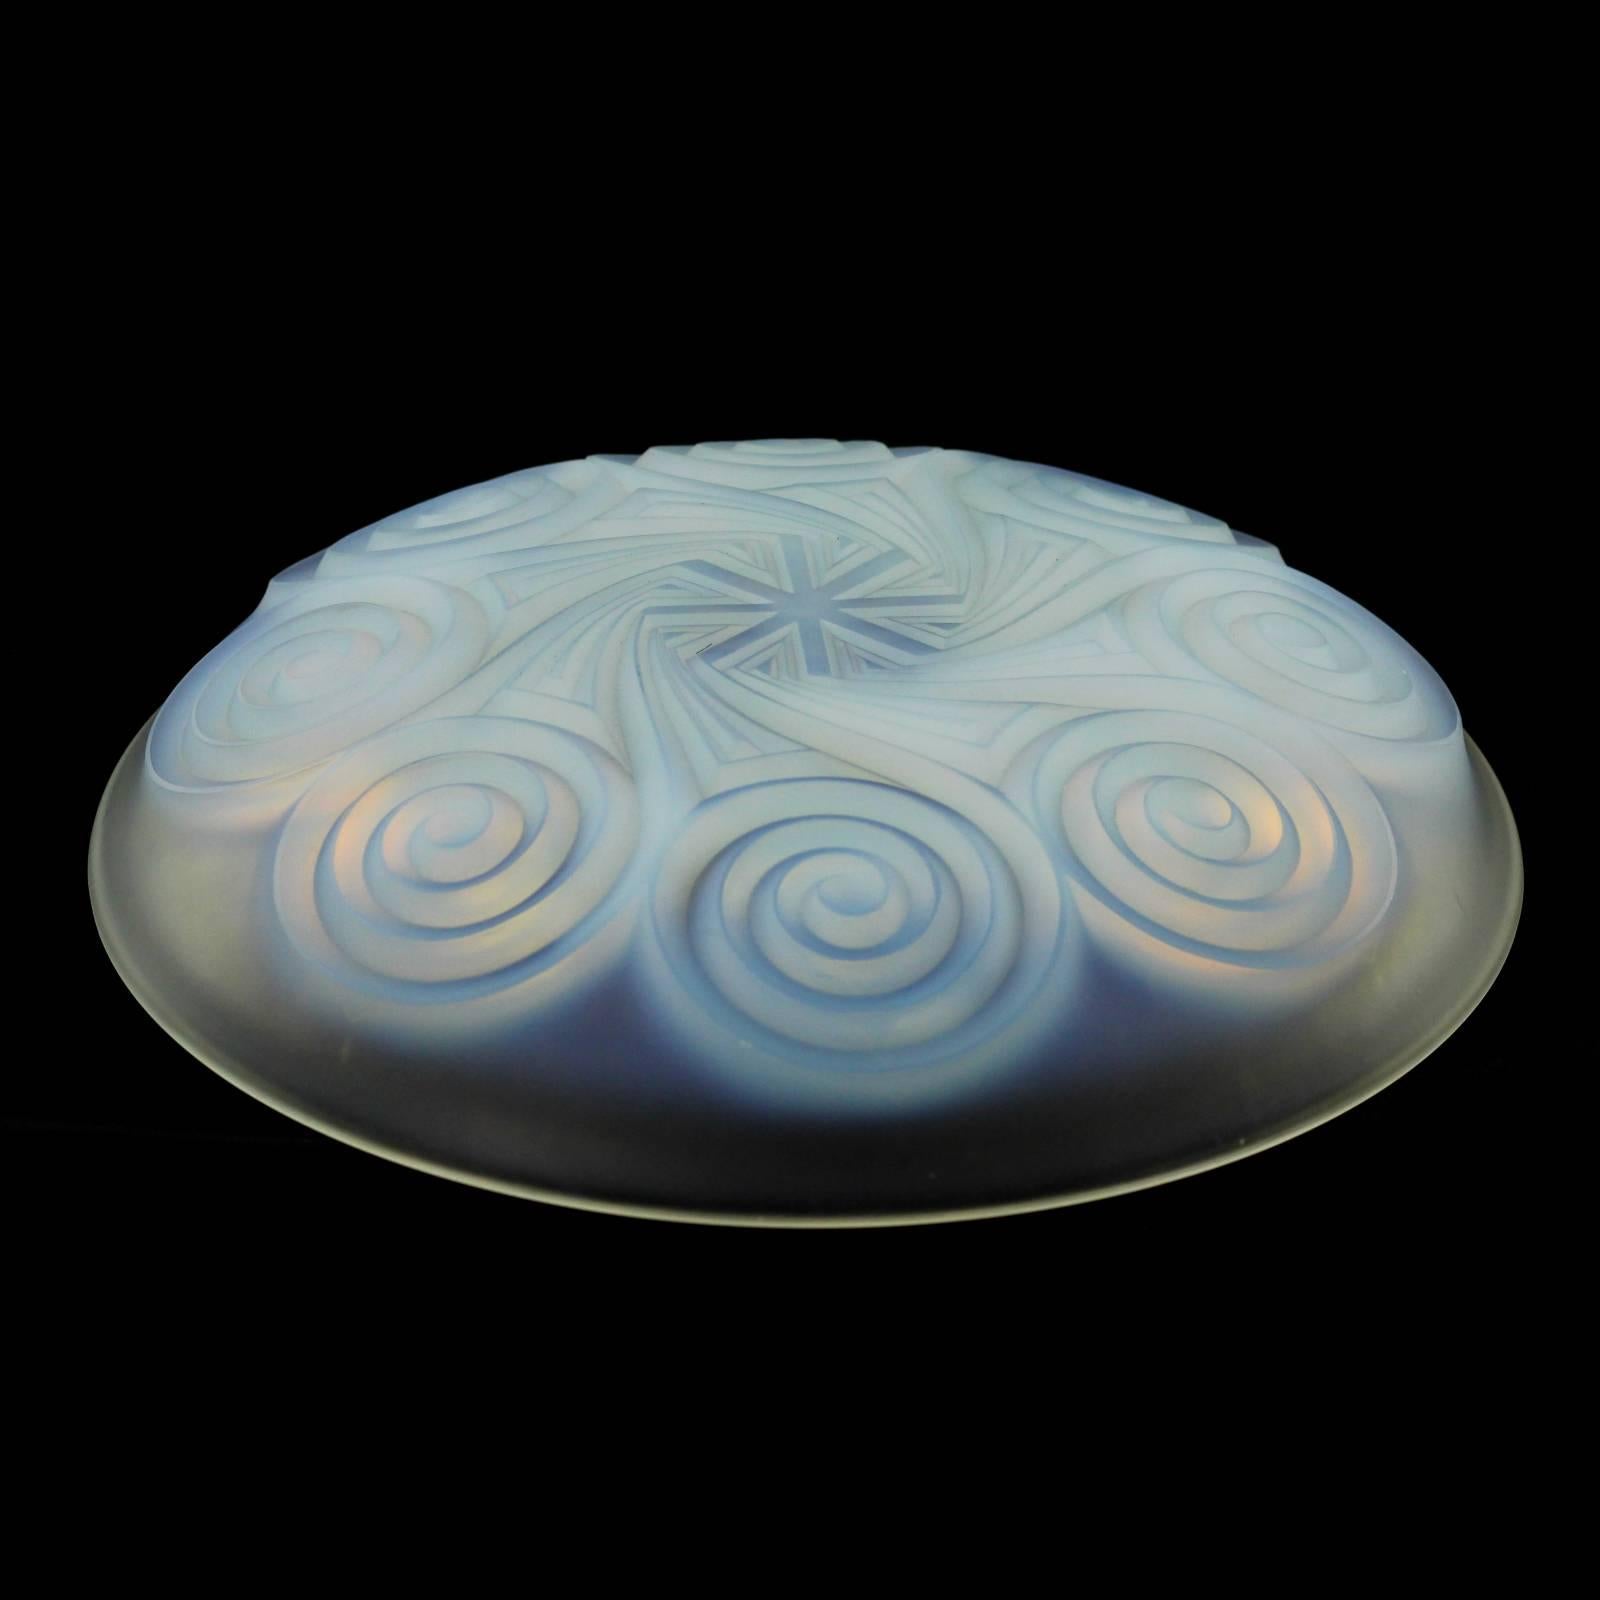 Cast Large 20th Century Art Deco Opalescent Glass Bowl with Swirl Pattern by Etling For Sale